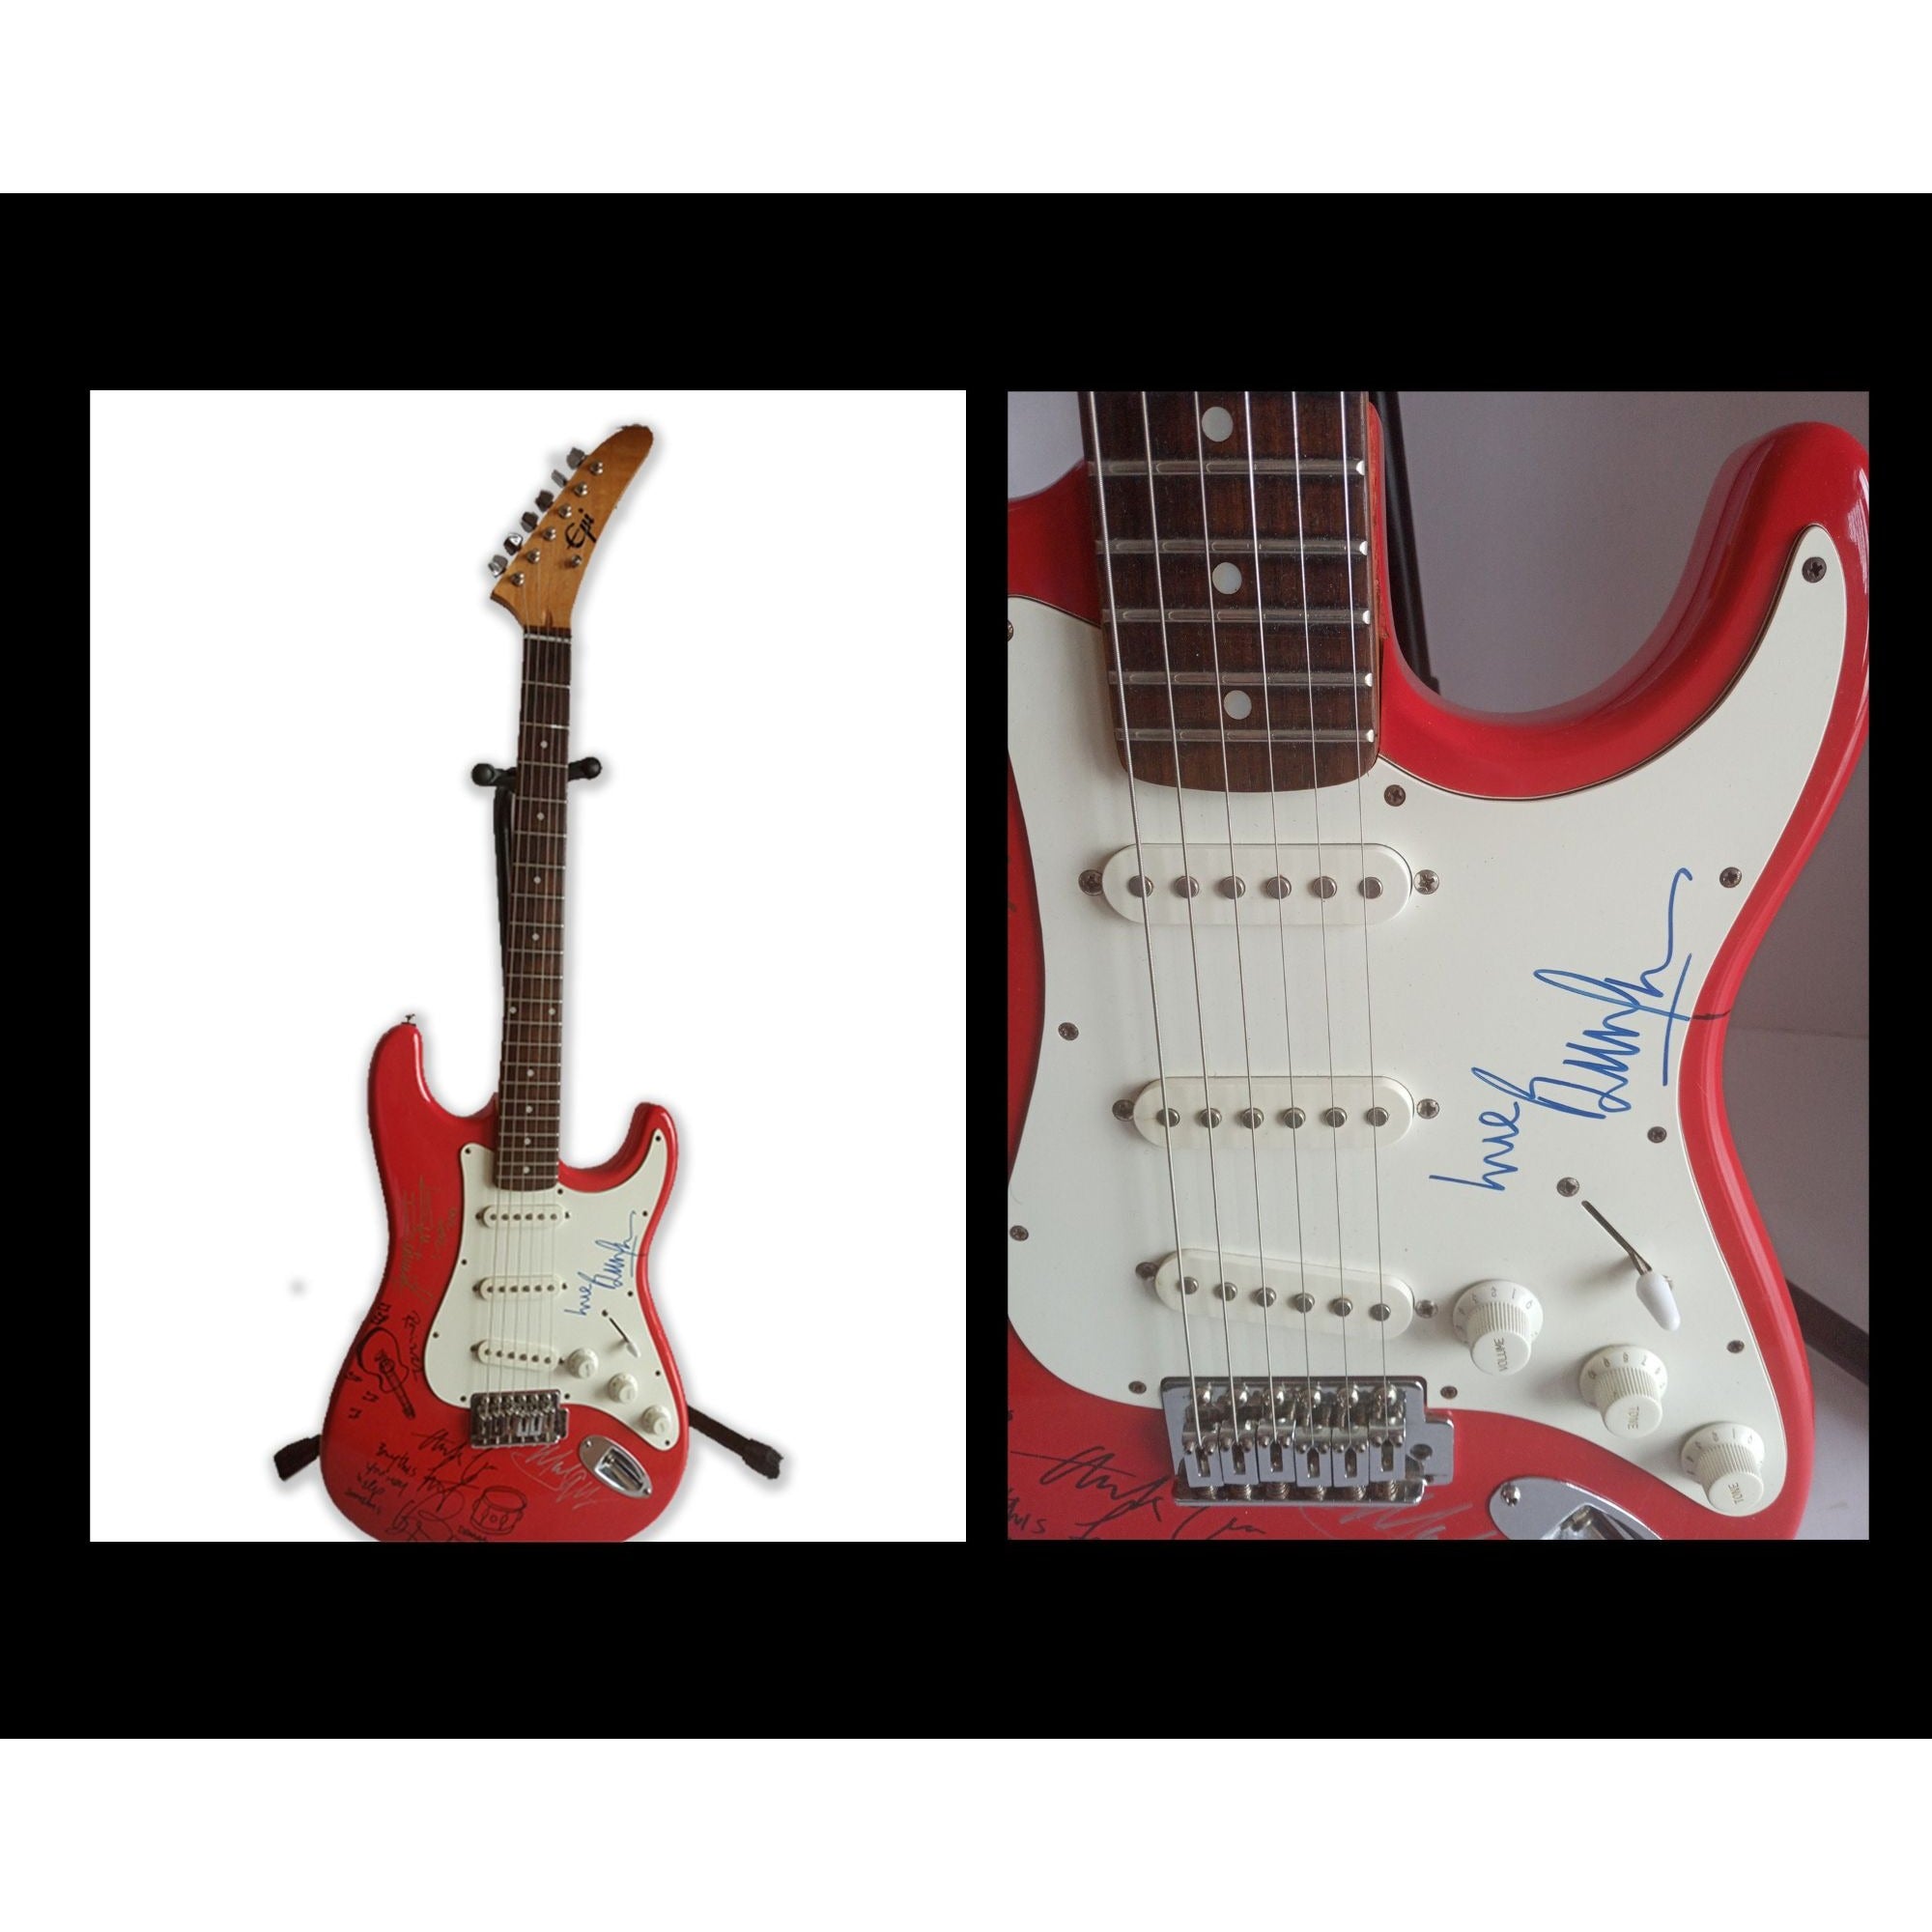 Keith Richards, Ronnie Wood, Mick Jagger, Bill Wyman and Charlie Watts signed guitar with proof